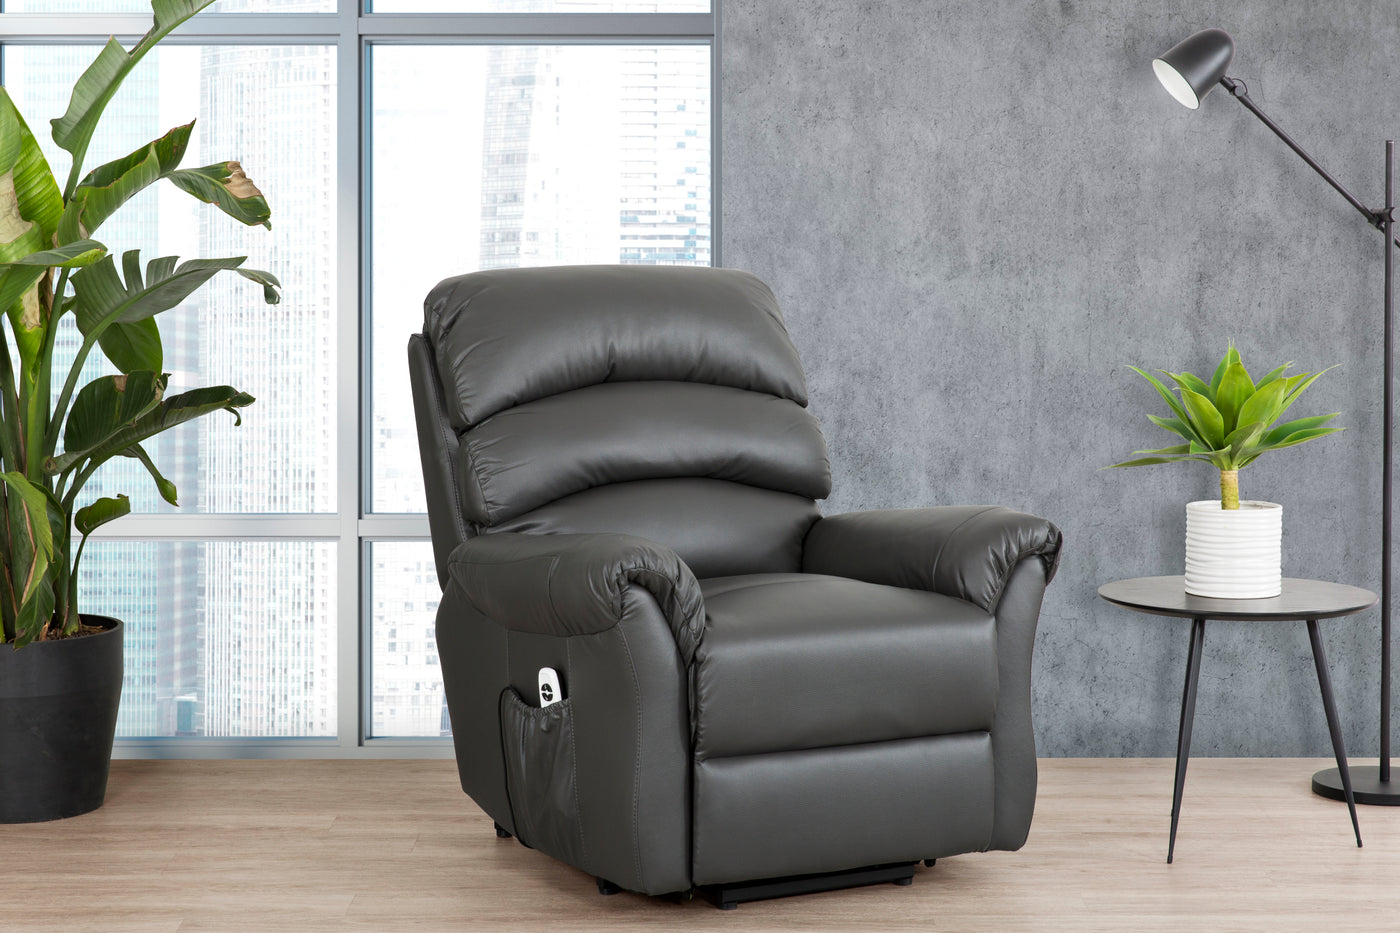 Paolo Power Lift Recliner - Grey